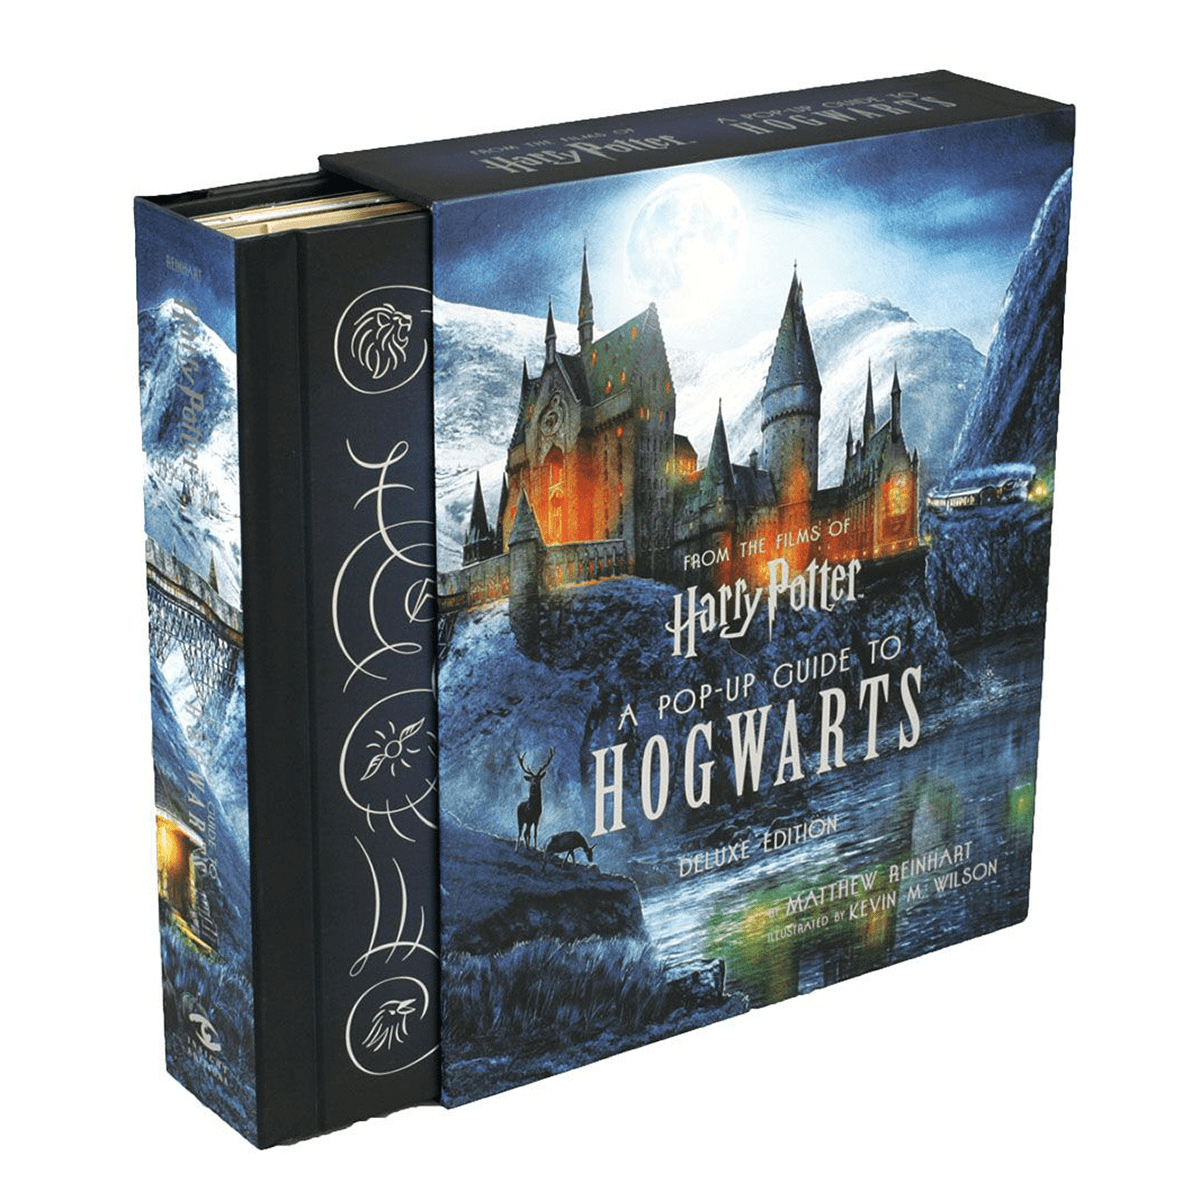 Harry Potter Harry Potter A Pop-Up Guide to Hogwarts Book by